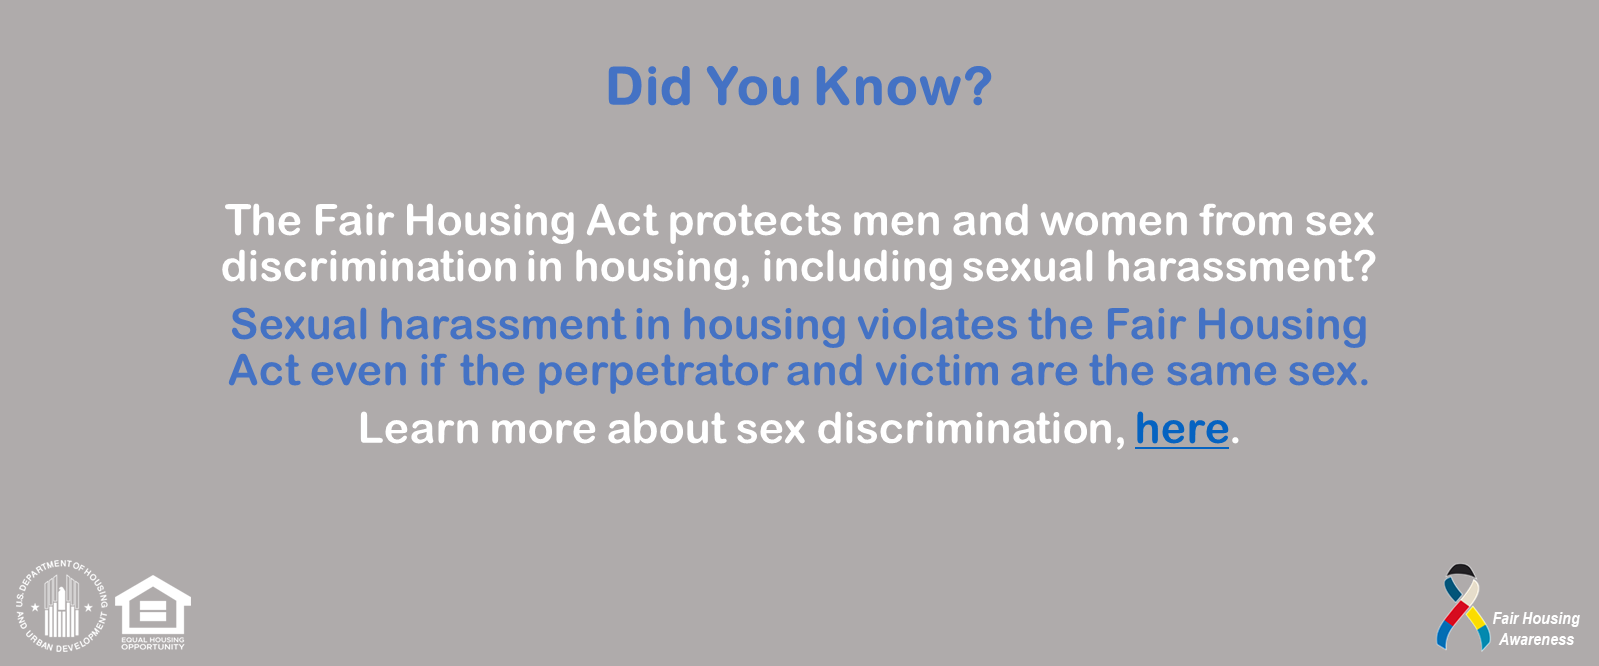 [The Fair Housing Act protects men and women from sex discrimination in housing, including sexual harassment.]. HUD Photo